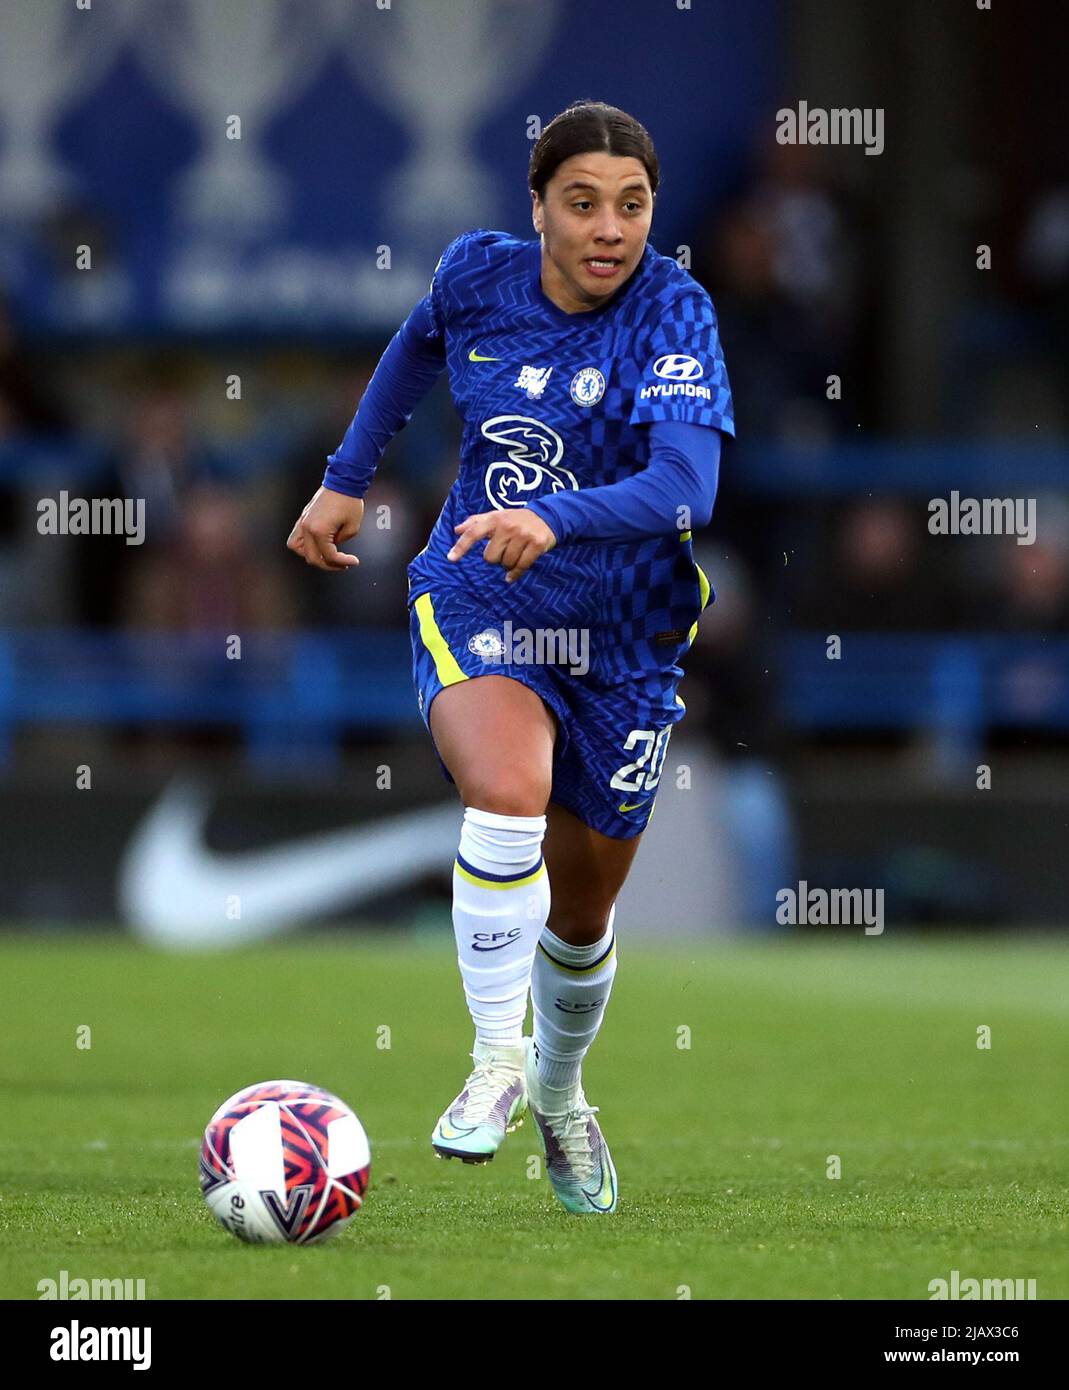 File photo dated 03-04-2022 of Chelsea's Sam Kerr. Hemp has also made the shortlist for the PFA Women’s Player of the Year alongside City team-mate Alex Greenwood. The pair face stiff competition from Chelsea duo Sam Kerr and Pernille Harder, who helped their team win the domestic double. Arsenal’s classy Dutch forward Vivianne Miedema and her Gunners team-mate Kim Little compete the main player of the year shortlist. . Issue date: Wednesday June 1, 2022. Stock Photo